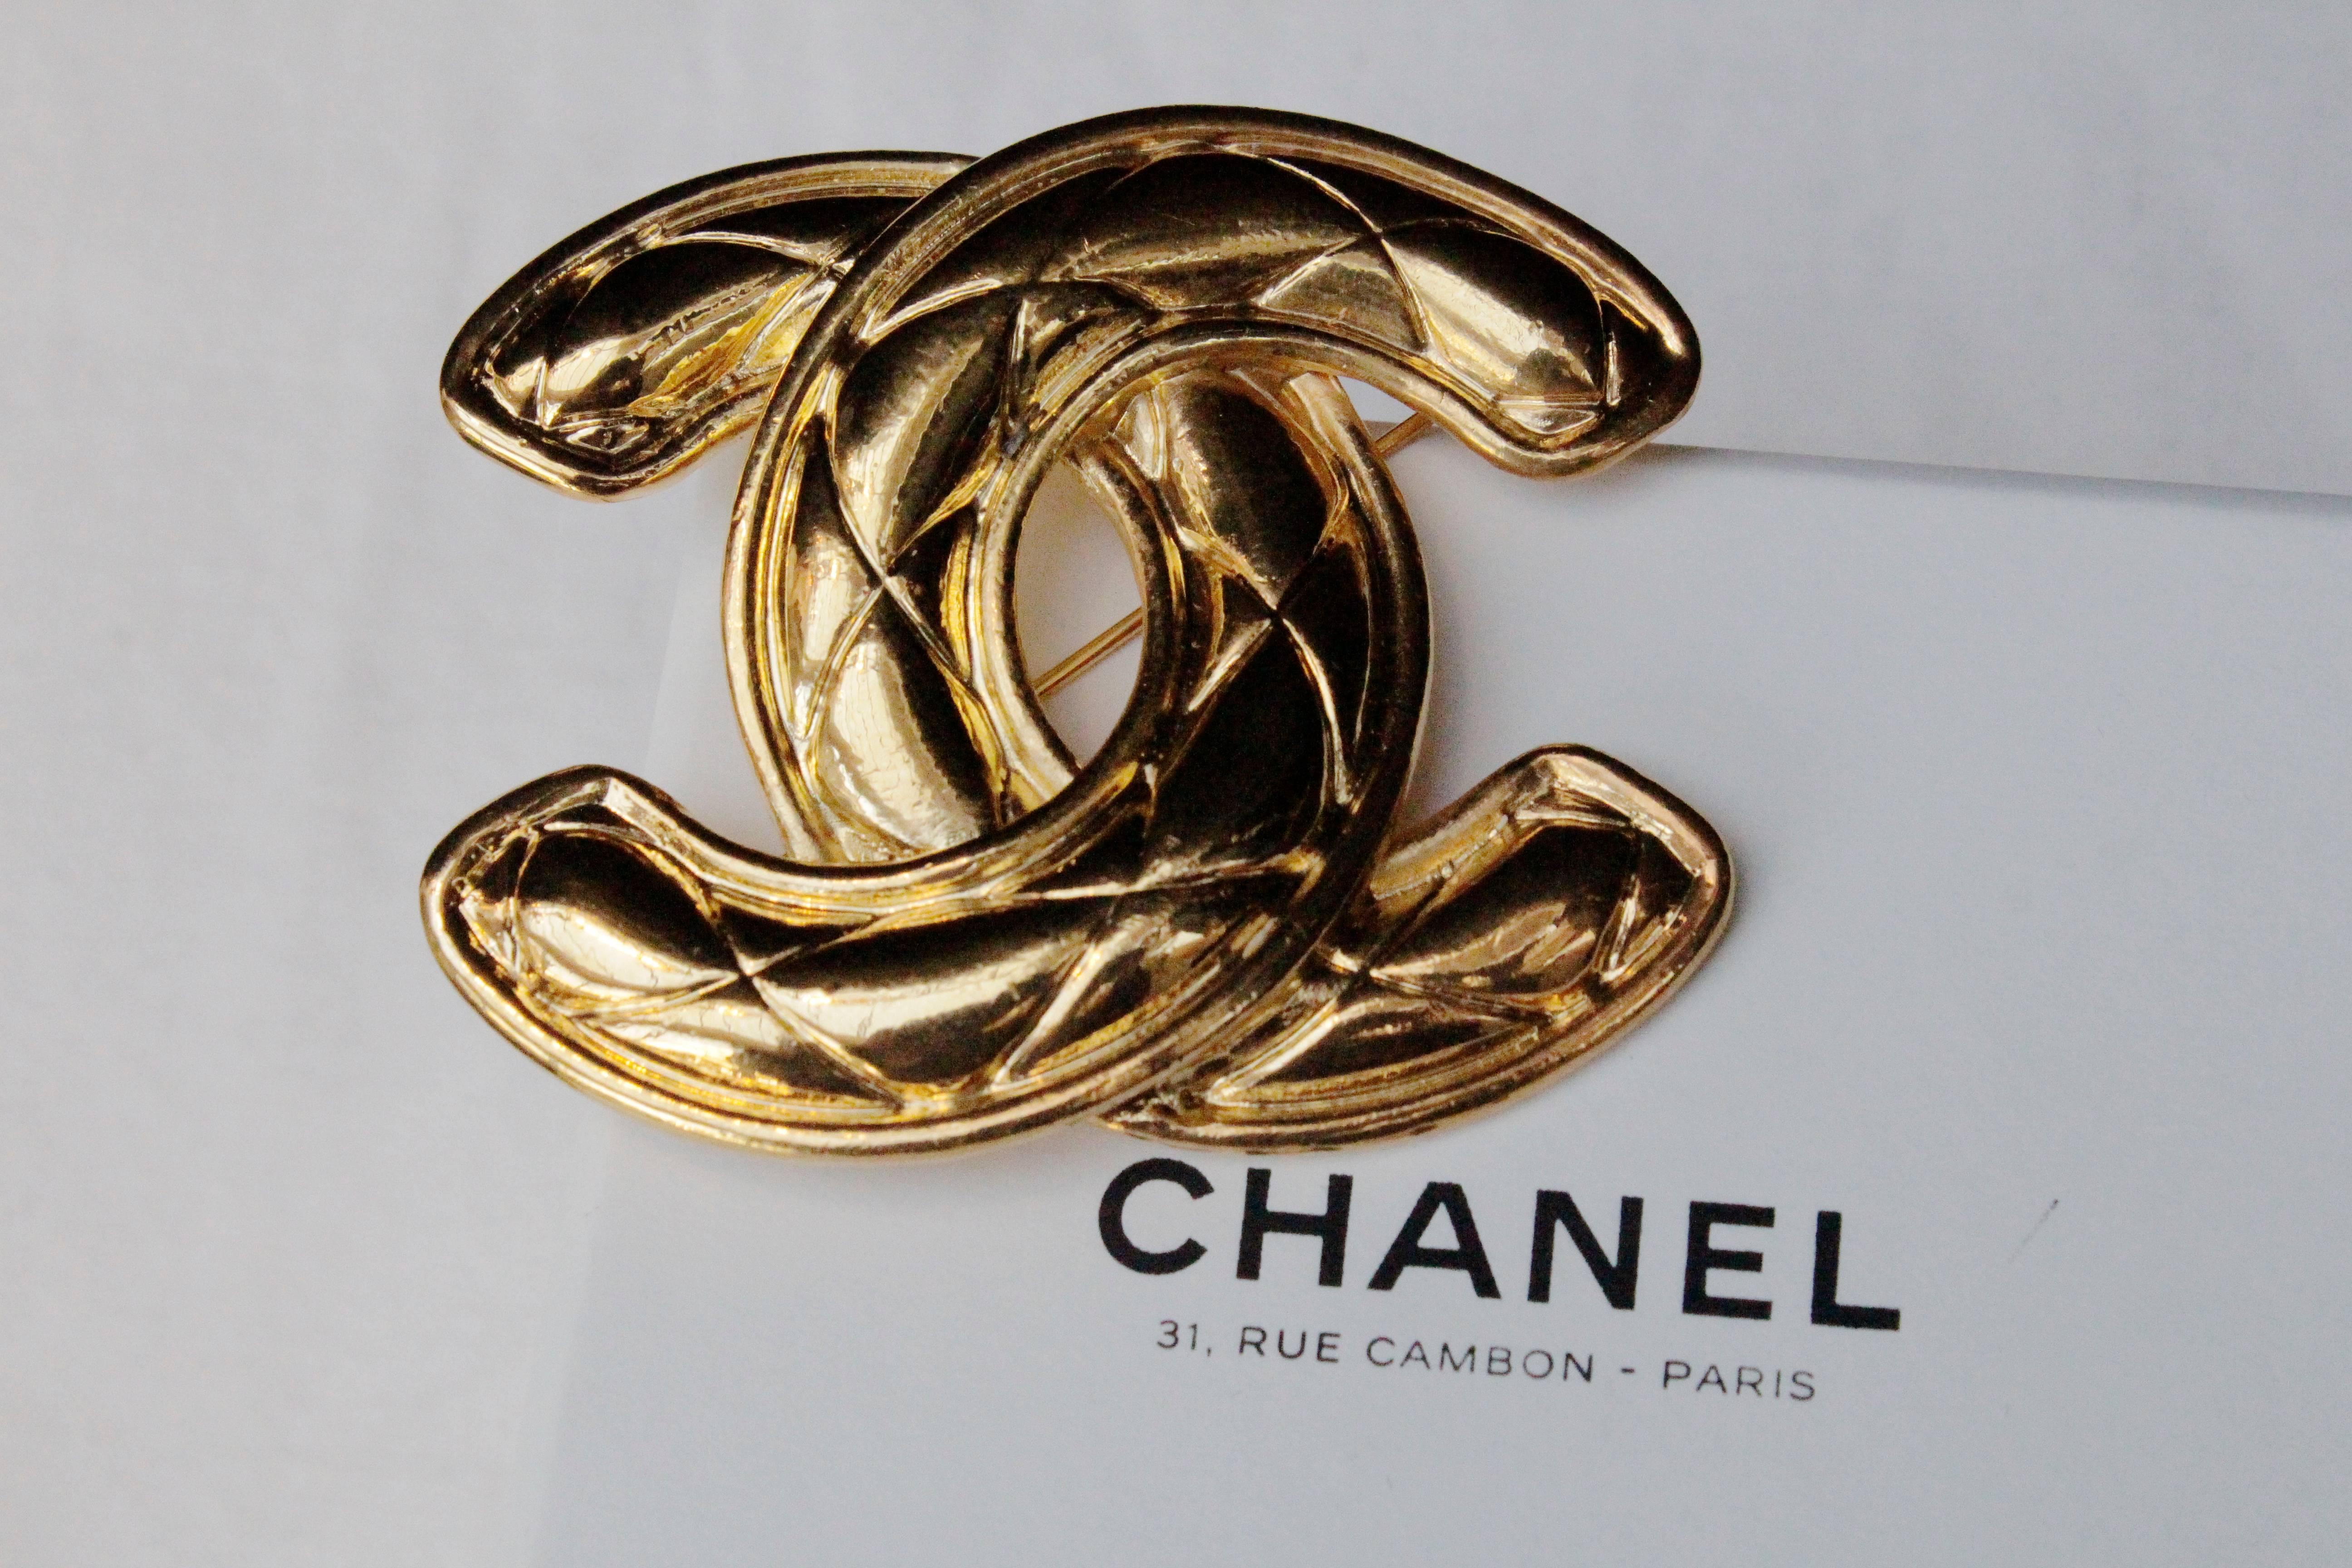 CHANEL (Made in France) Large chiseled gilded metal brooch representing a quilted CC logo. Signed at back.

Circa 1990.

Measurements 5 x 6 cm (2 x 2.25 in).

Very good condition.